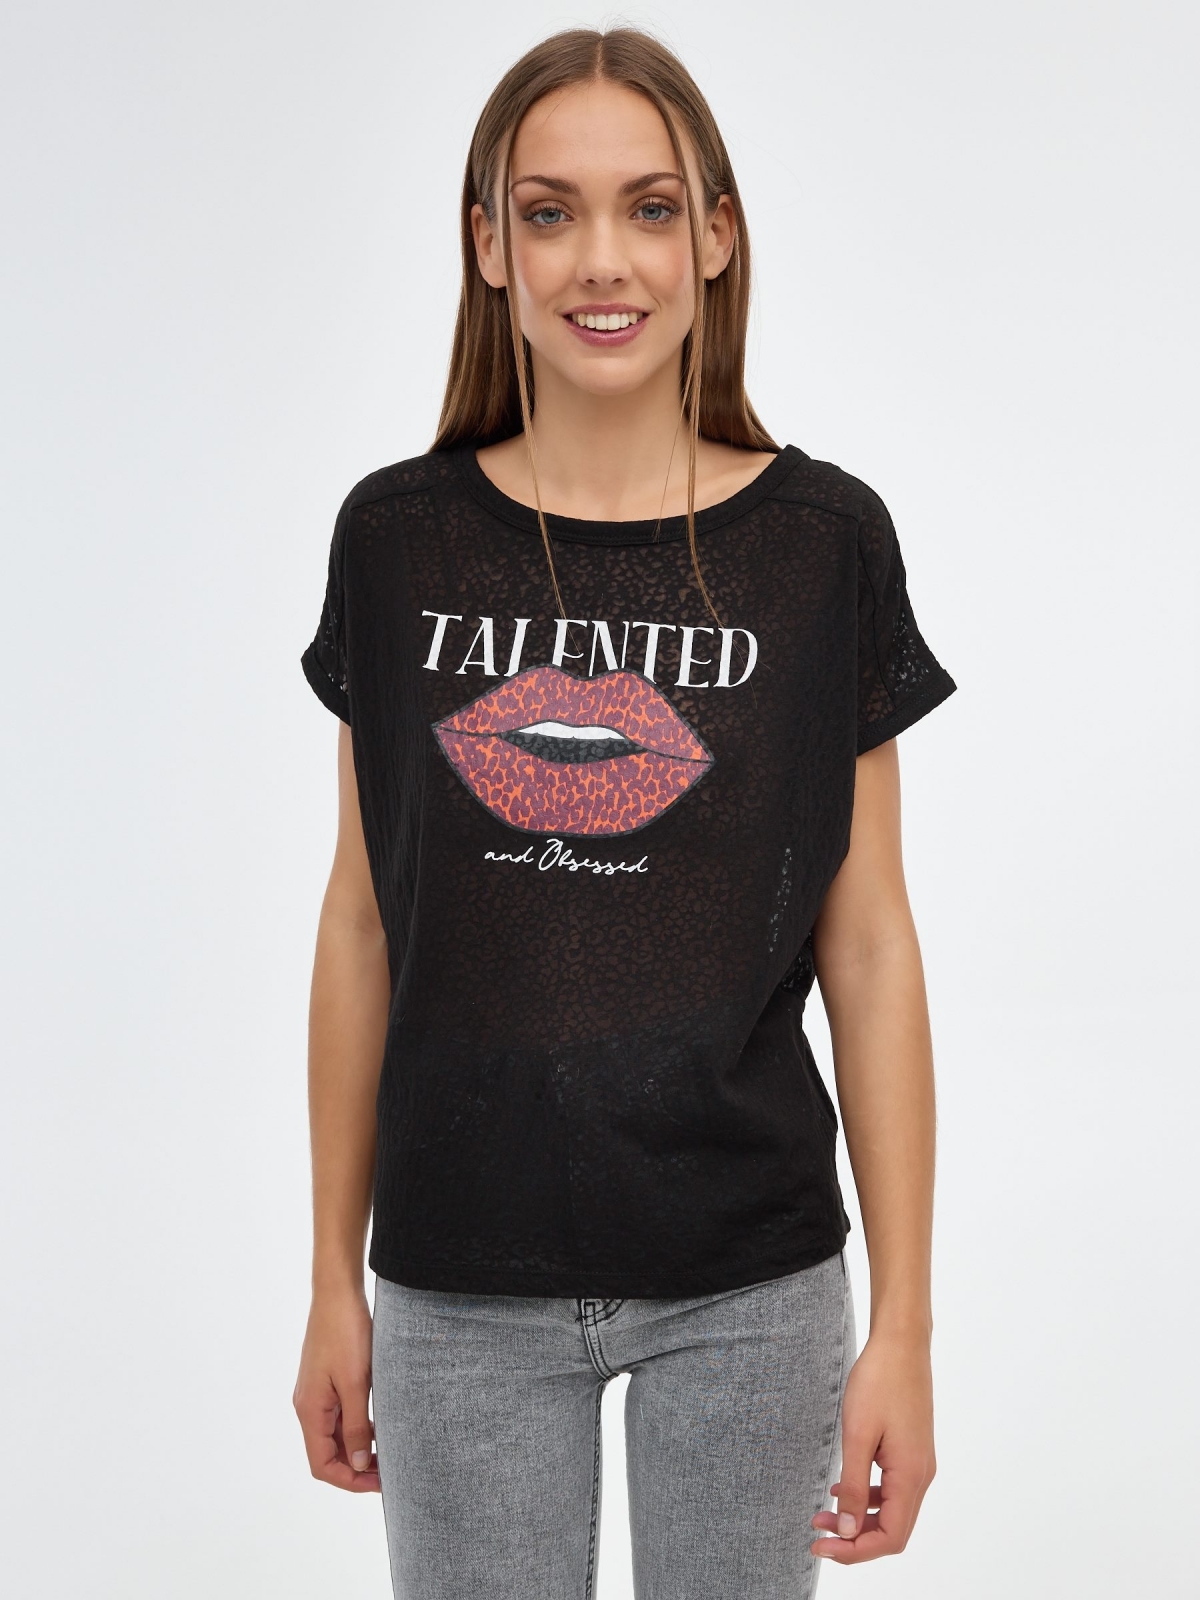 Talented T-shirt black middle front view